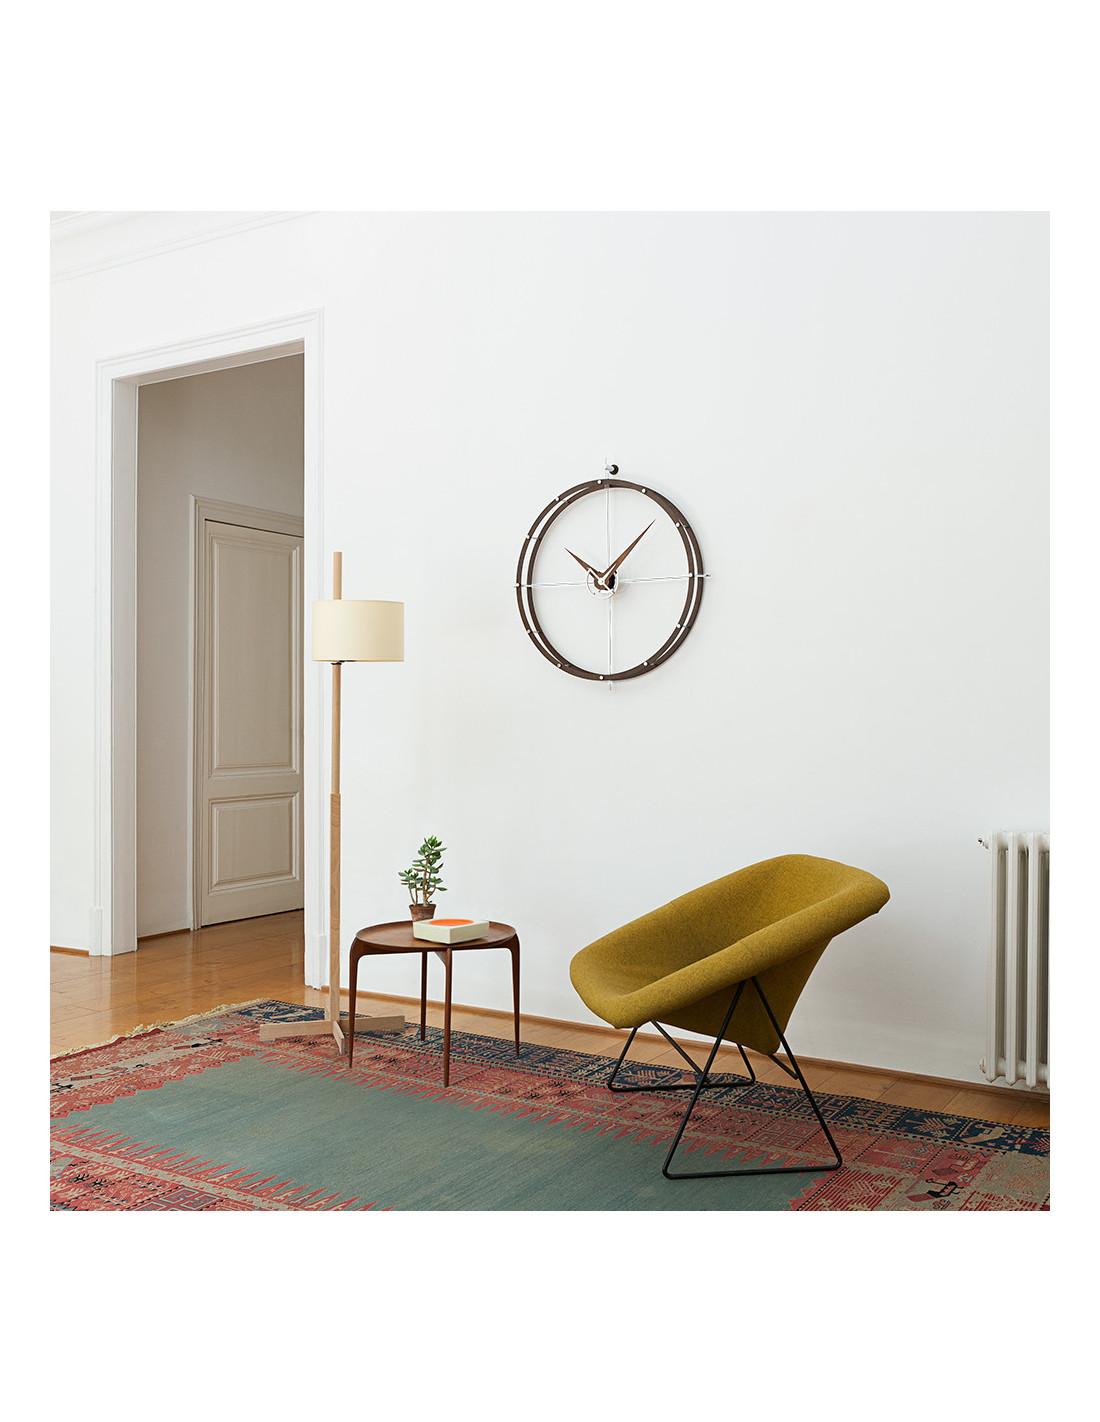 This elegant designer clock presents a diameter of 70 centimeters and a height of 80 cm that covers any space with elegance.
Doble O N wall clock: Rings and hands in wenge wood .
Not OK for Outdoor Use
Warranty: 1 year
Each clock is a unique